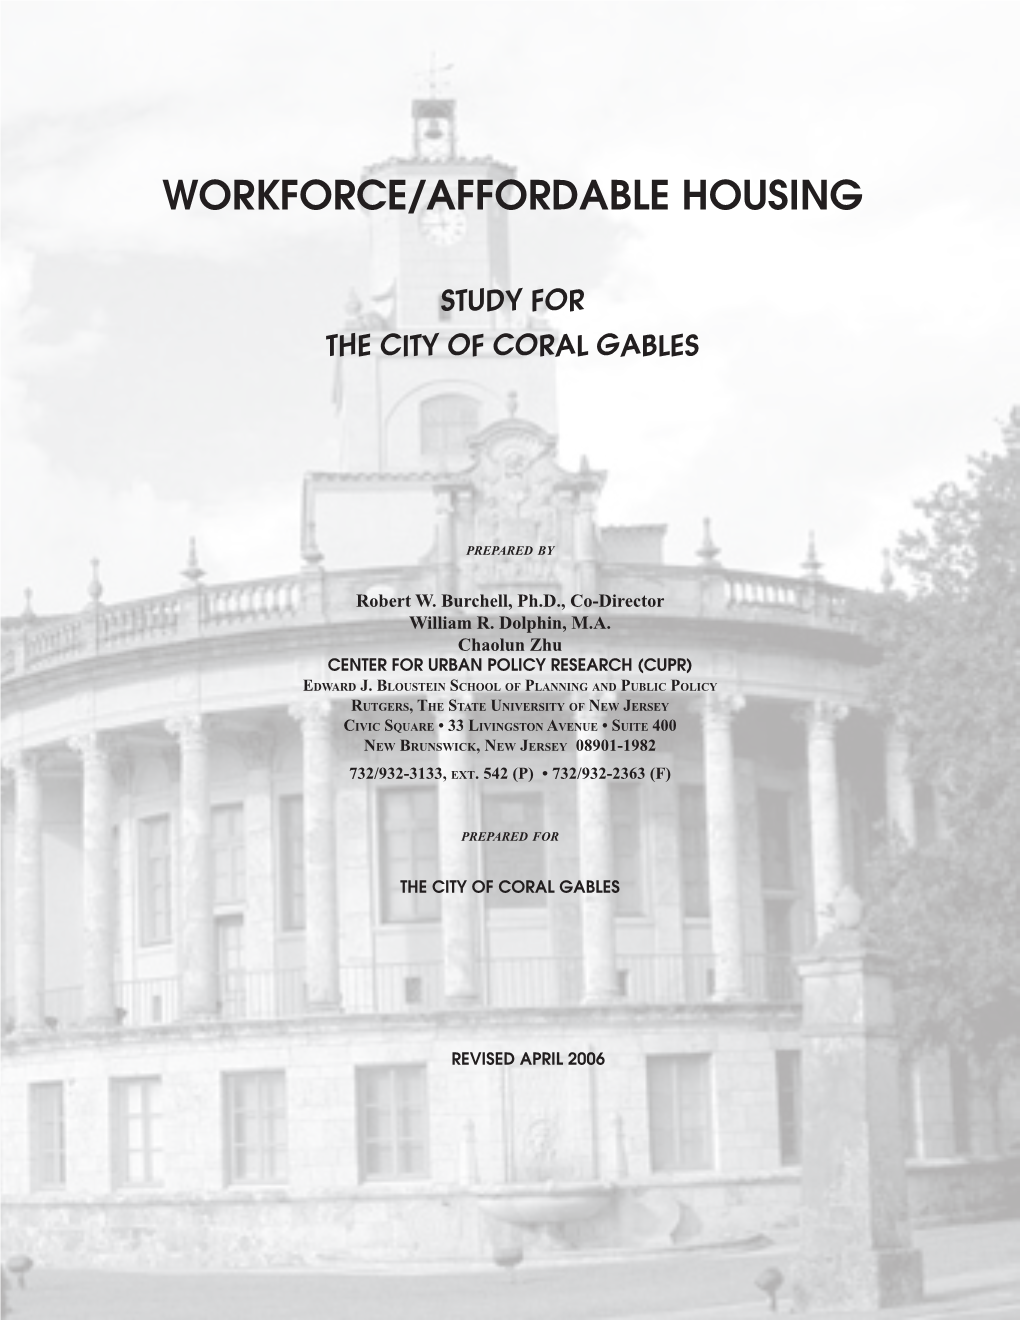 Workforce/Affordable Housing Study for the City of Coral Gables